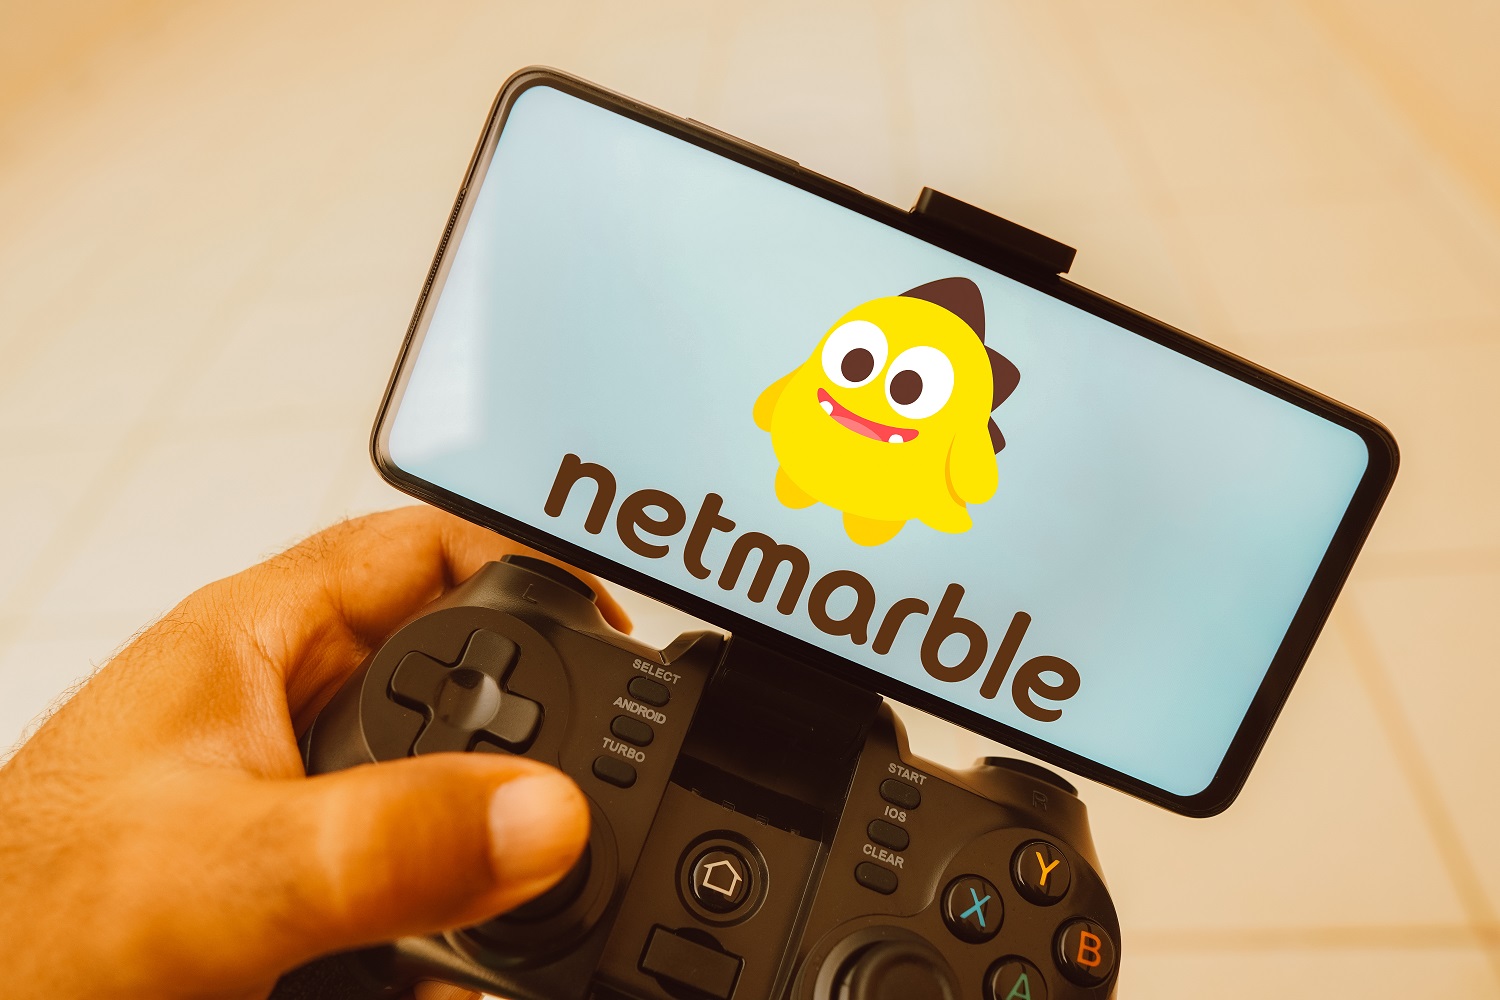 A person holds a joystick attached to a mobile phone with the Netmarble logo displayed on the phone’s screen.